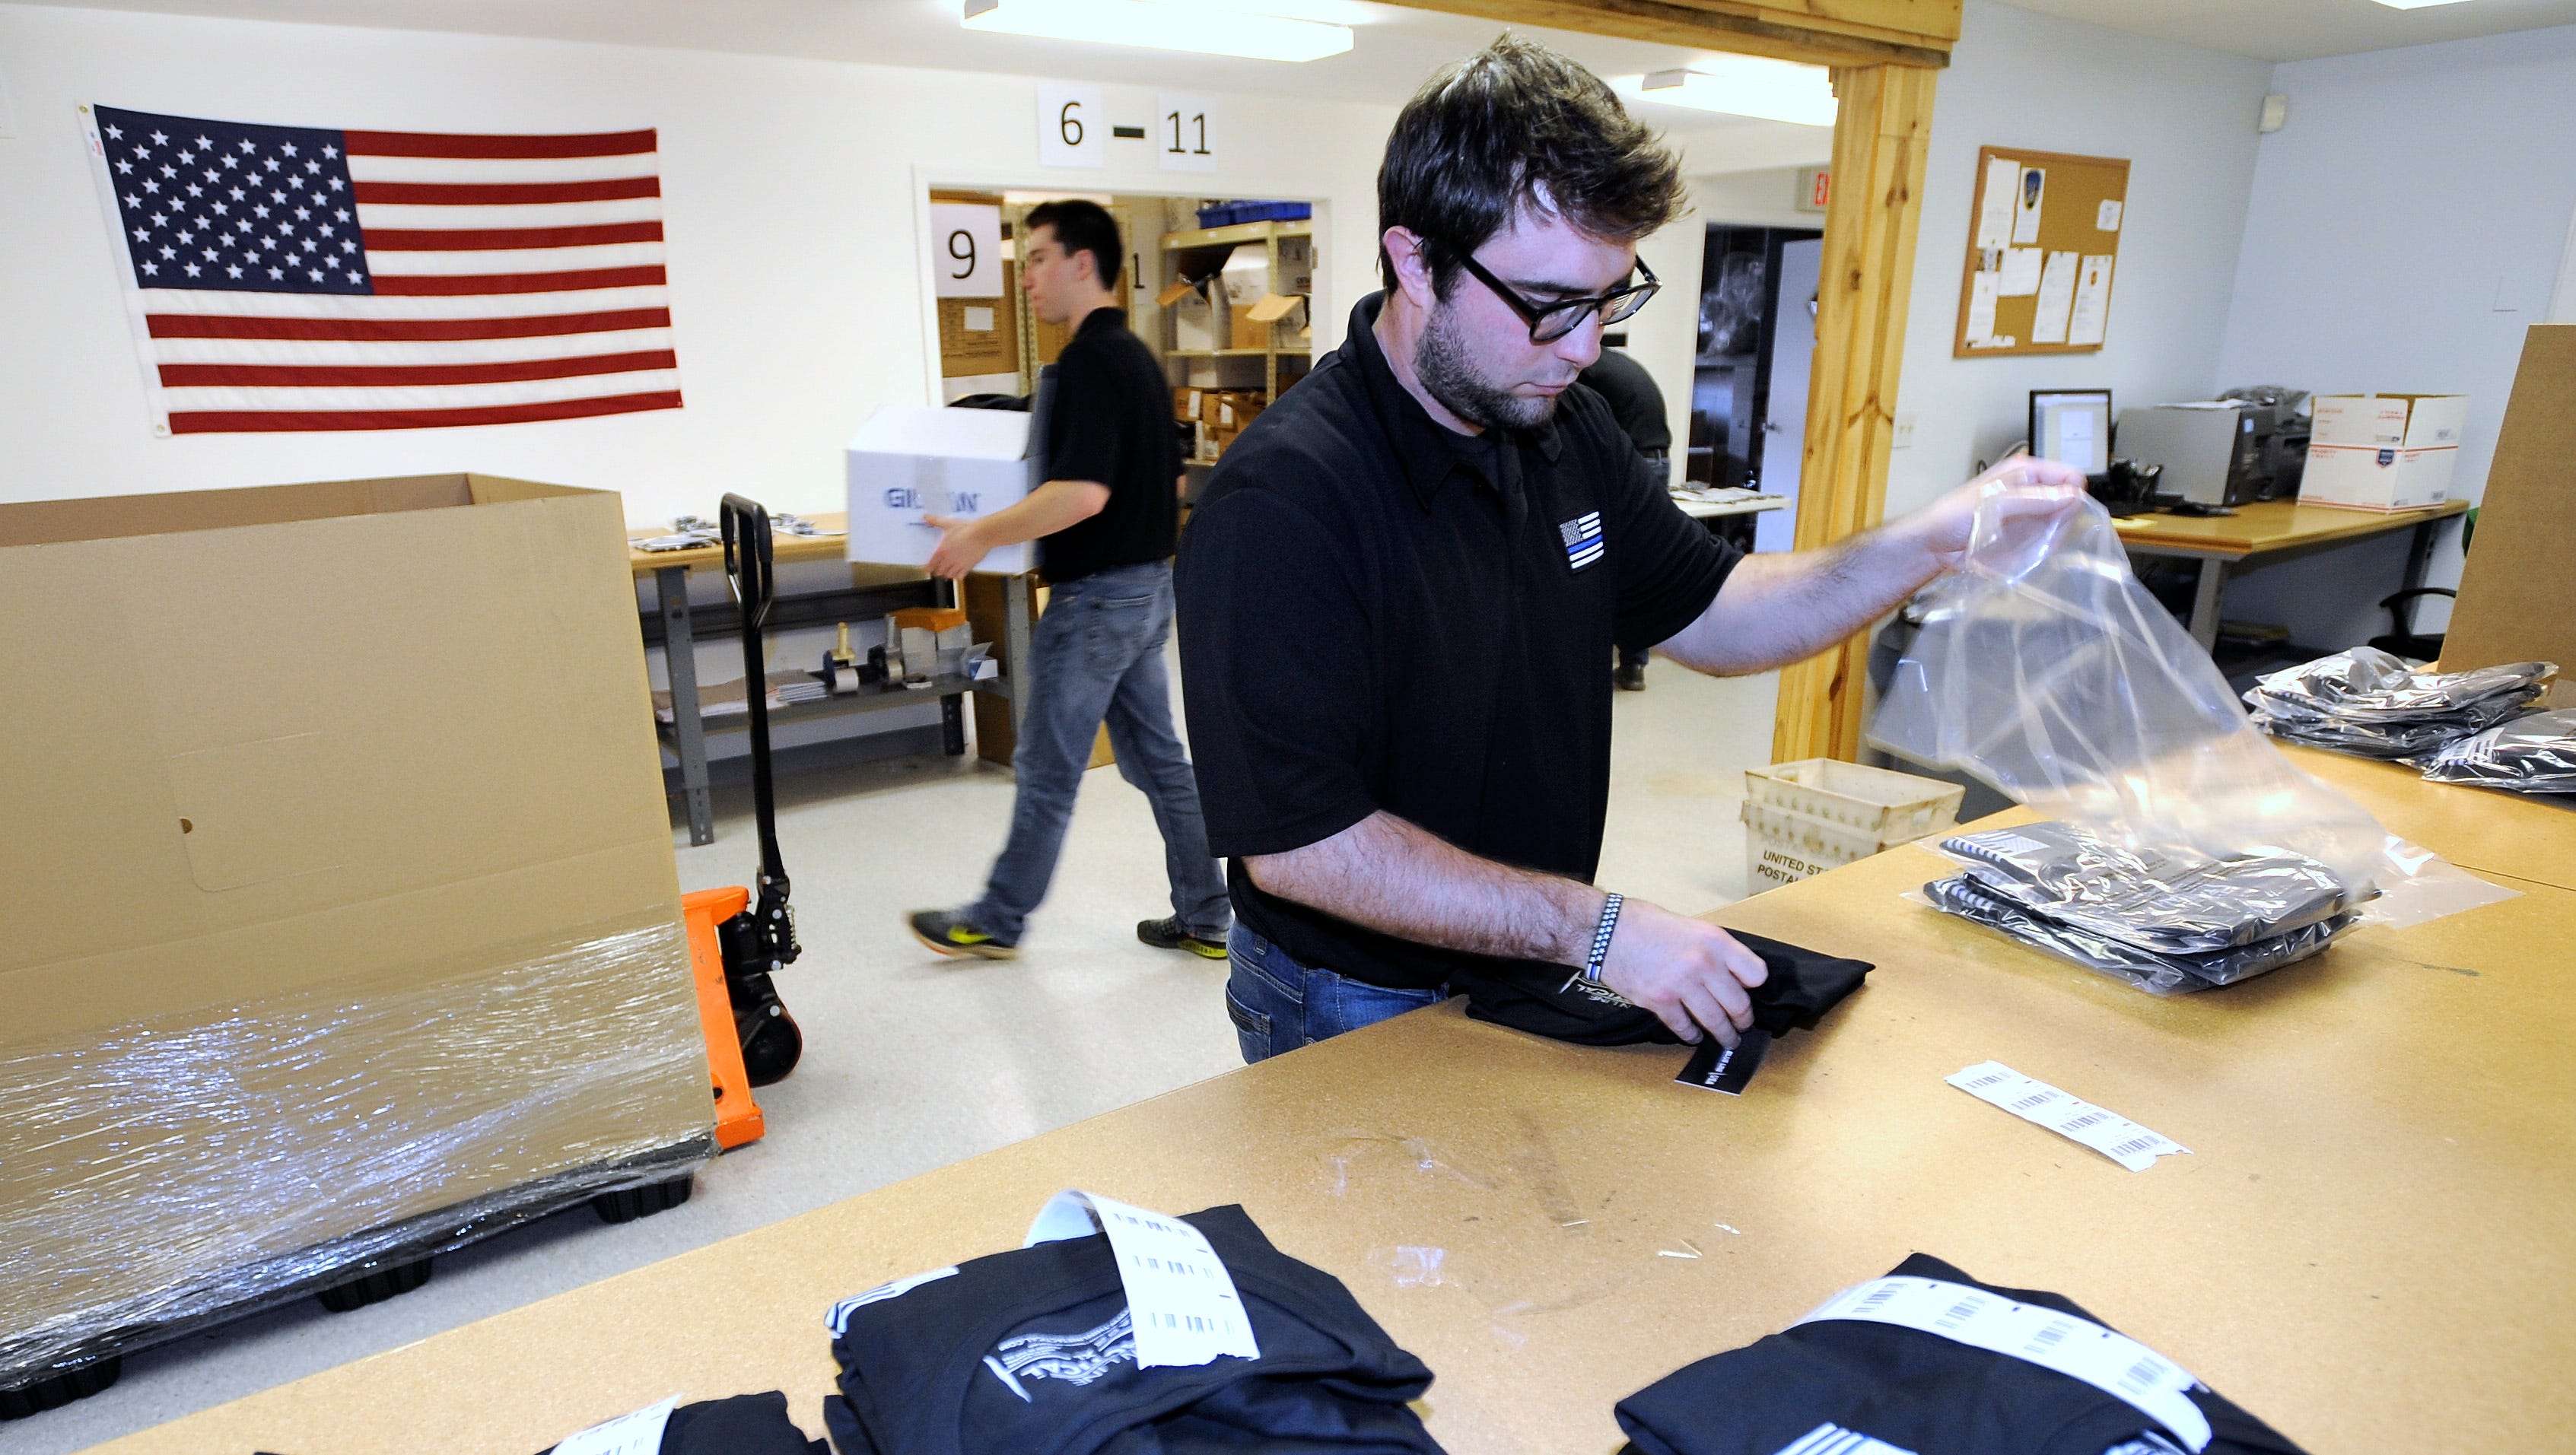 Jon Gaffke, 27, of Plymouth, packages Thin Blue Line USA T-shirts to ship to the Portland, Oregon Police Museum.